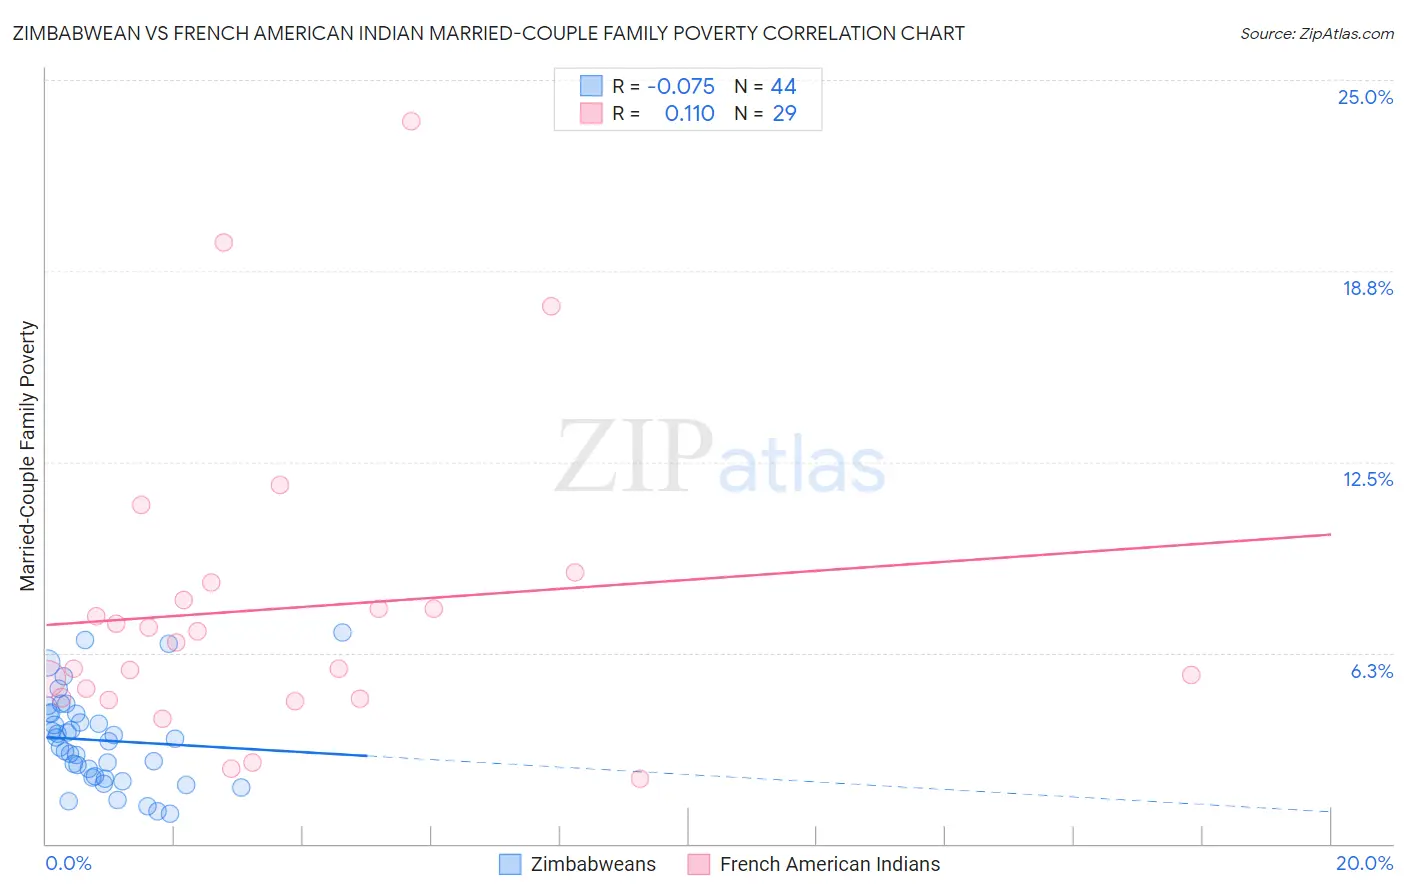 Zimbabwean vs French American Indian Married-Couple Family Poverty